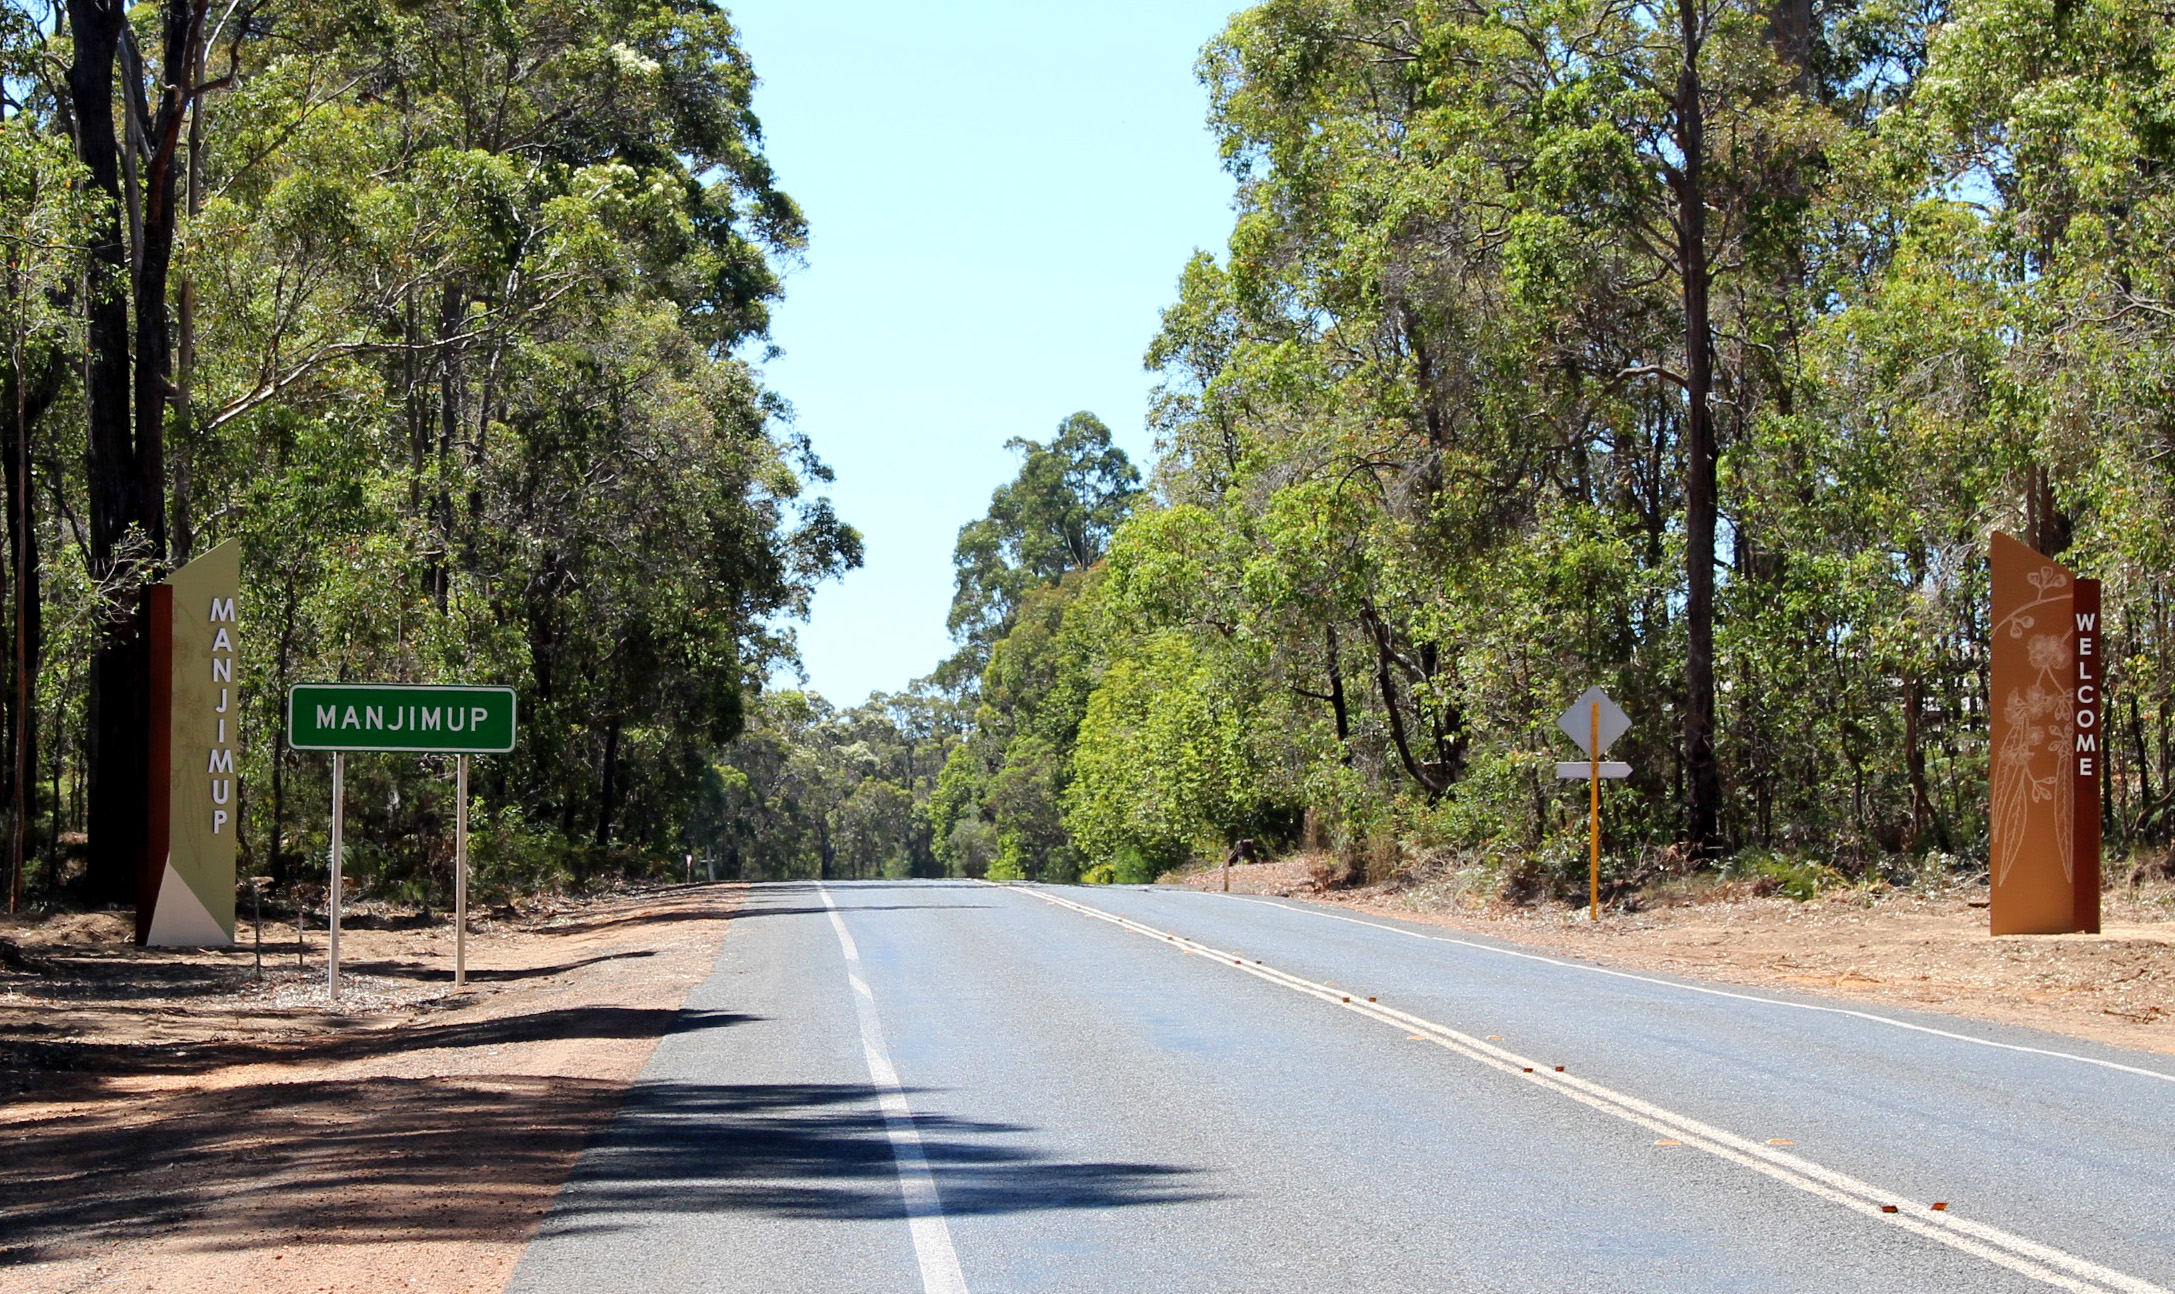 Two stone work and timber pillars on roadside marking entrance to Manjimup from South.